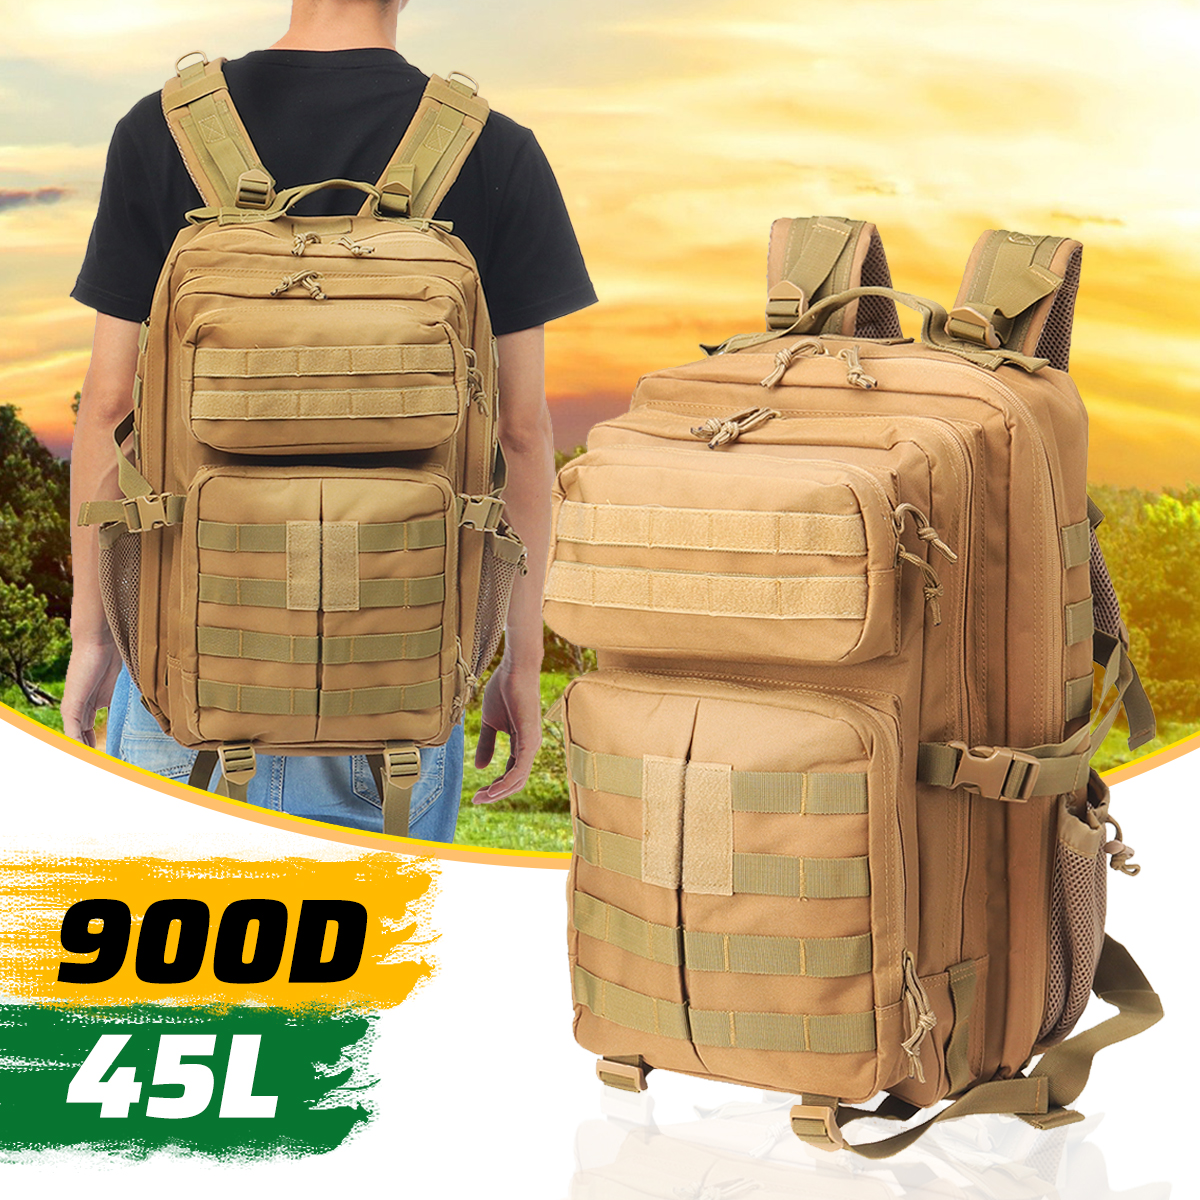 45L-900D-Waterproof-Tactical-Backpack-Oxford-Cloth-Molle-Military-Outdoor-Bag-Traveling-Camping-Hiki-1560781-1